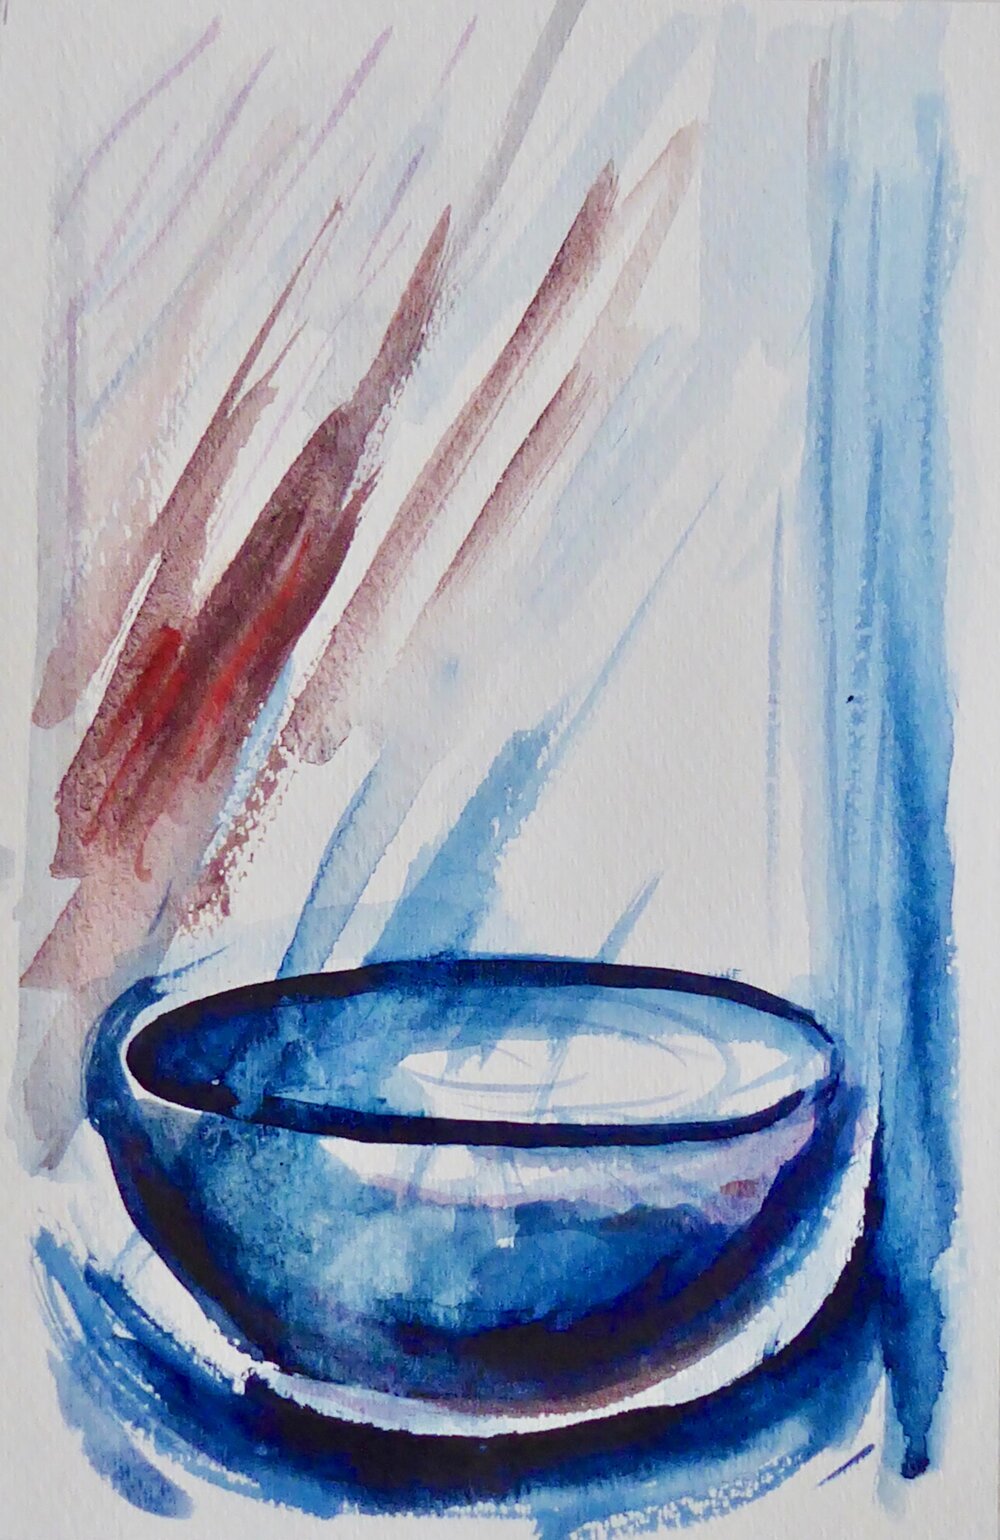  Three Vessels  acrylic and egg tempera on watercolour paper. 2020 